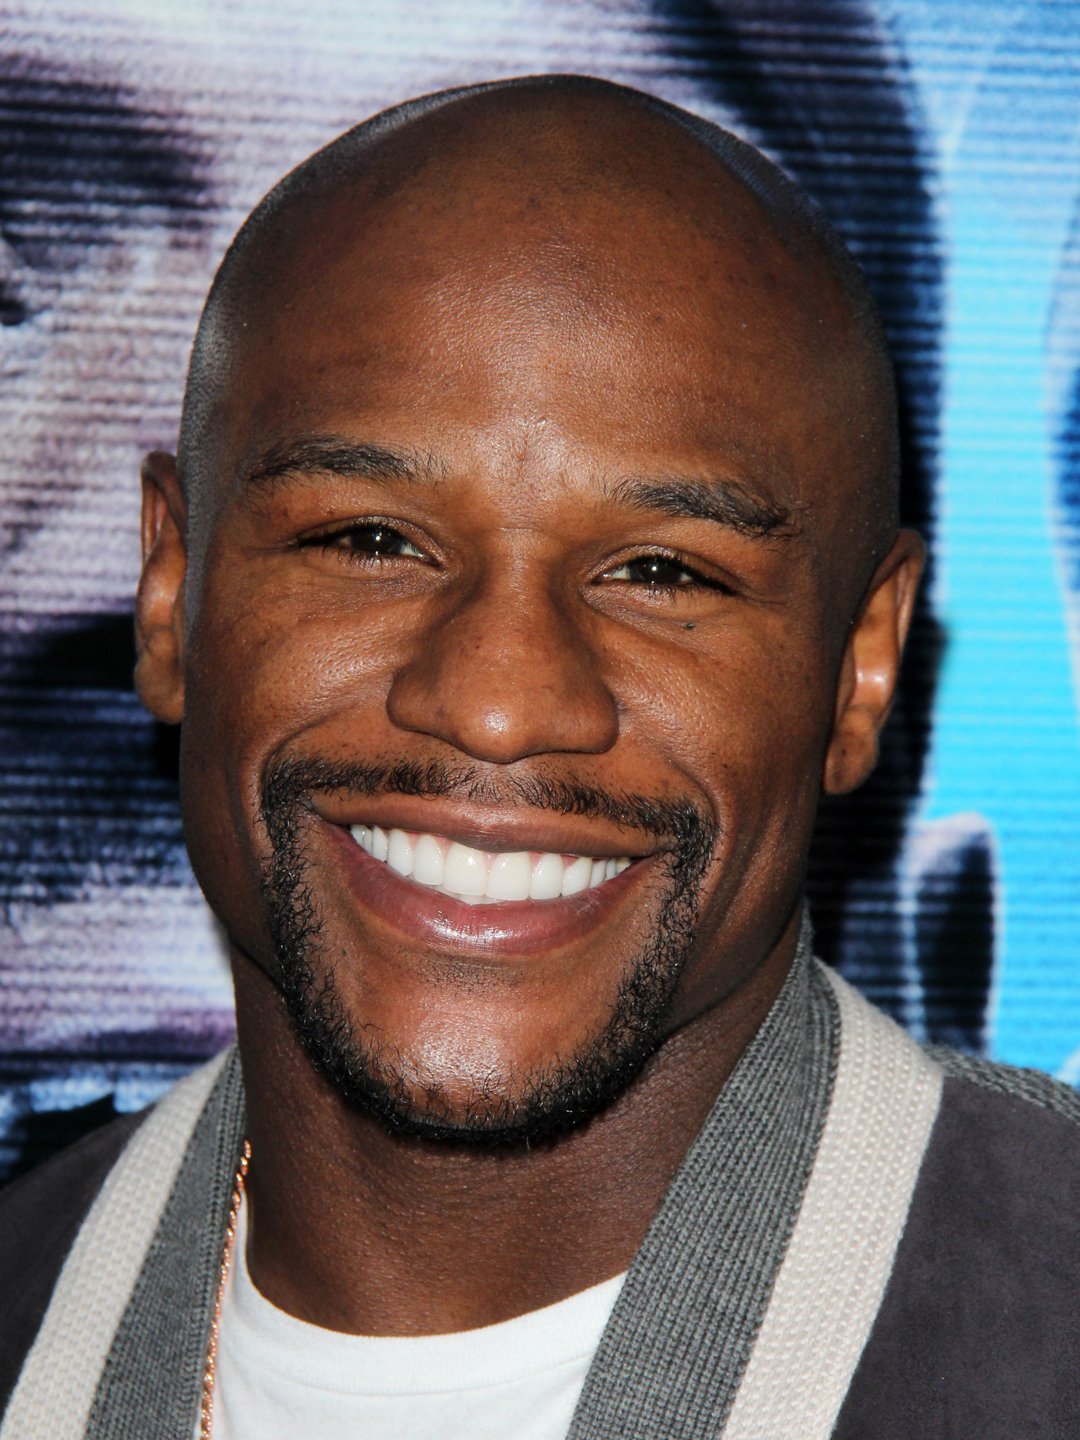 How tall is Floyd Mayweather Jr?